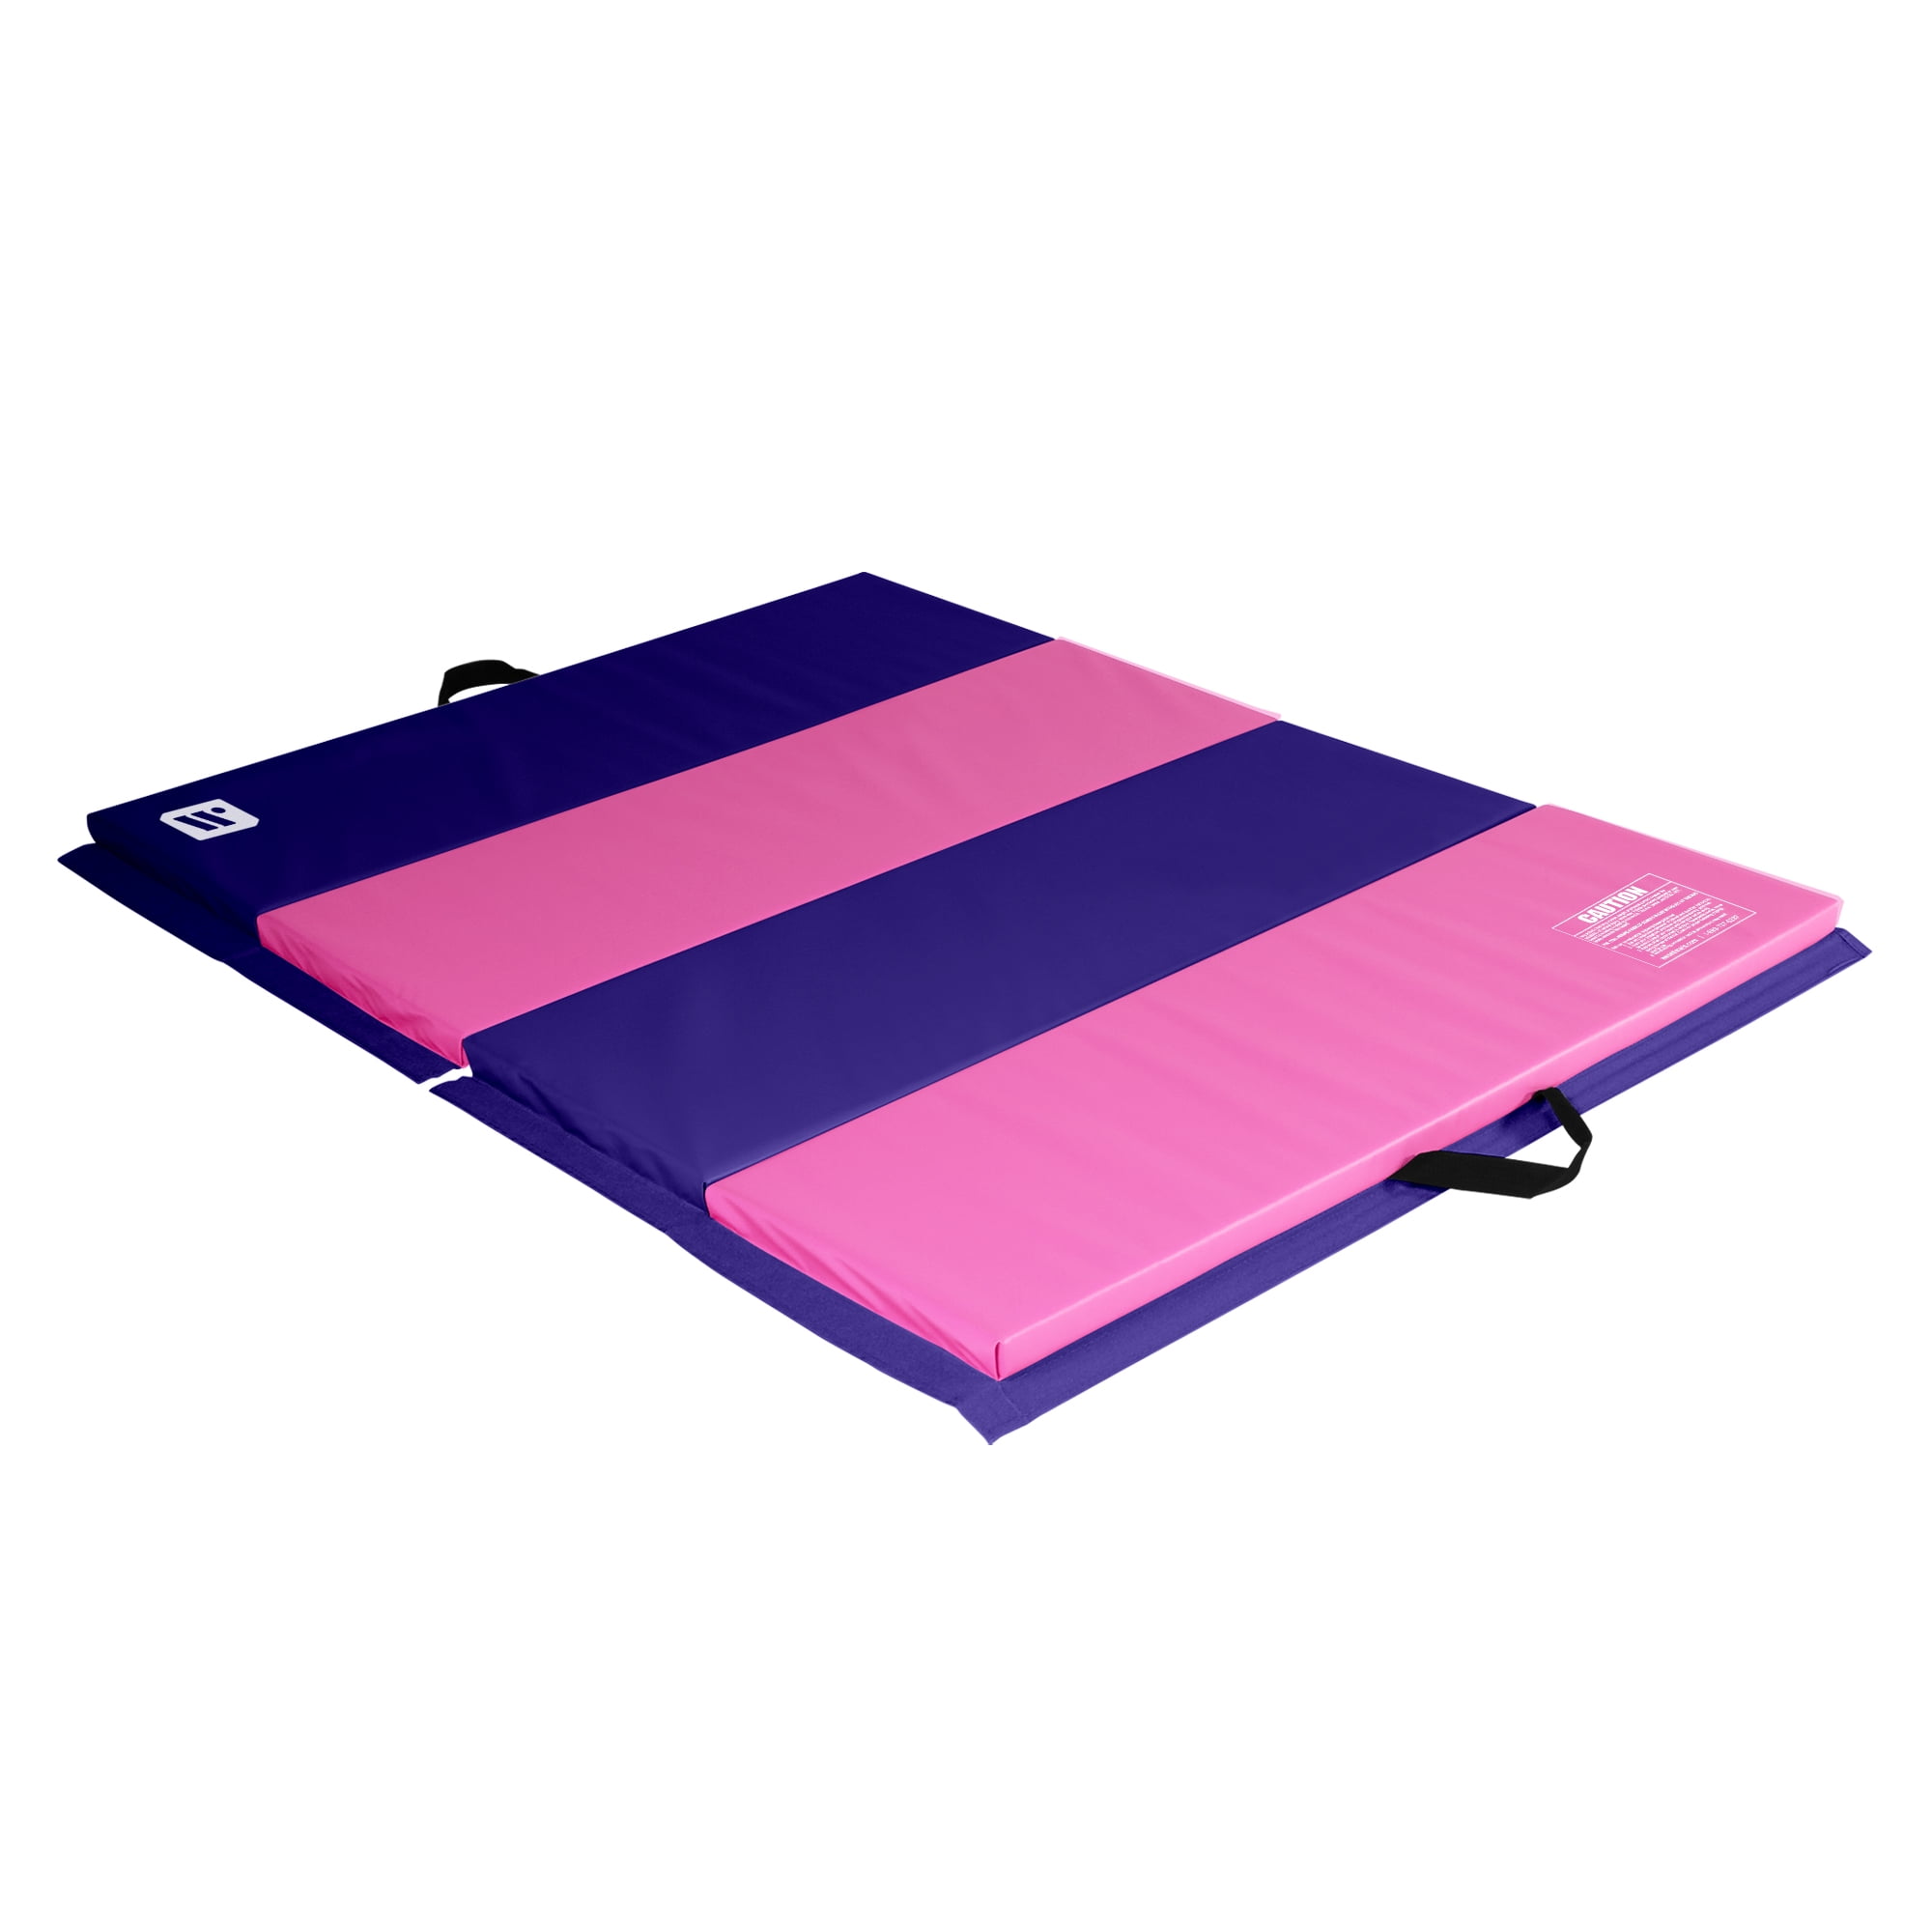 We Sell Mats - 4 ft x 6 x 2 in 4 x 6 - 2 Inch Thick, Purple / Pink